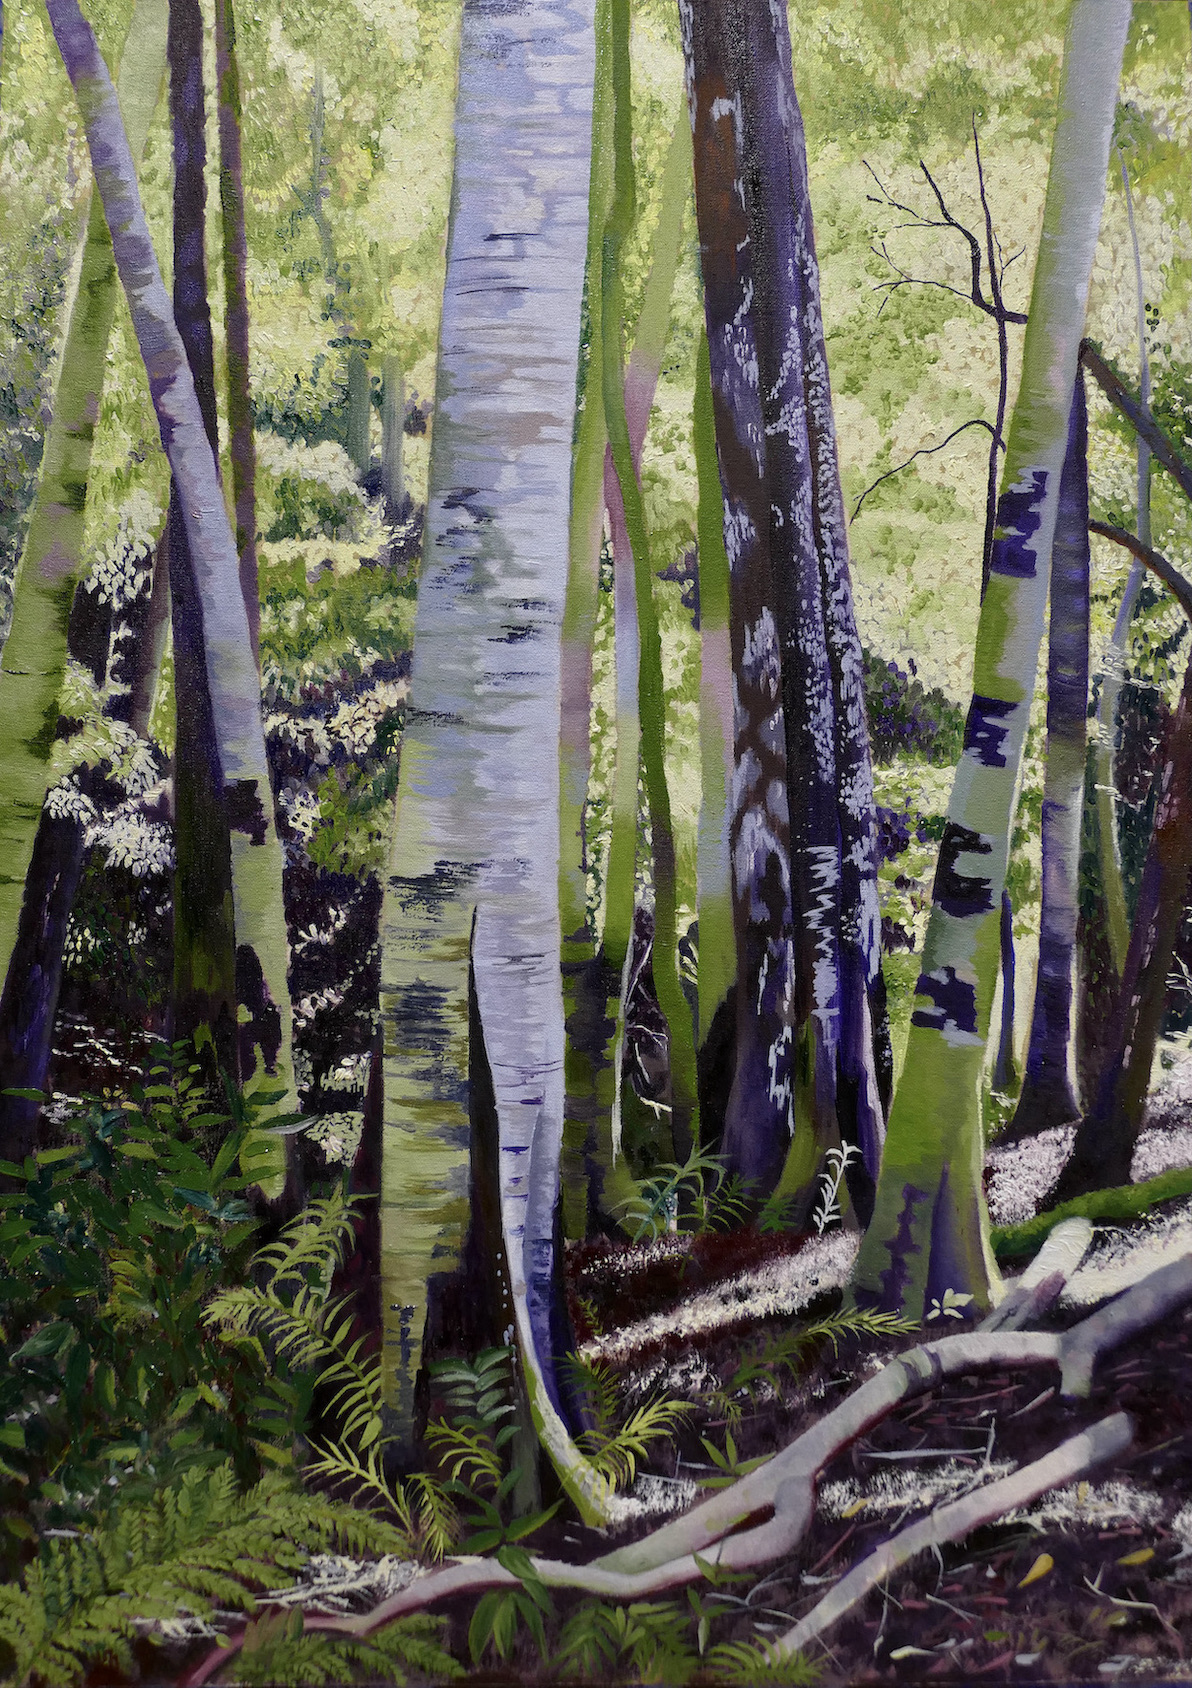 NATURE'S CATHEDRAL by Ms Narelle Scott | Lethbridge 20000 2021 Finalists | Lethbridge Gallery